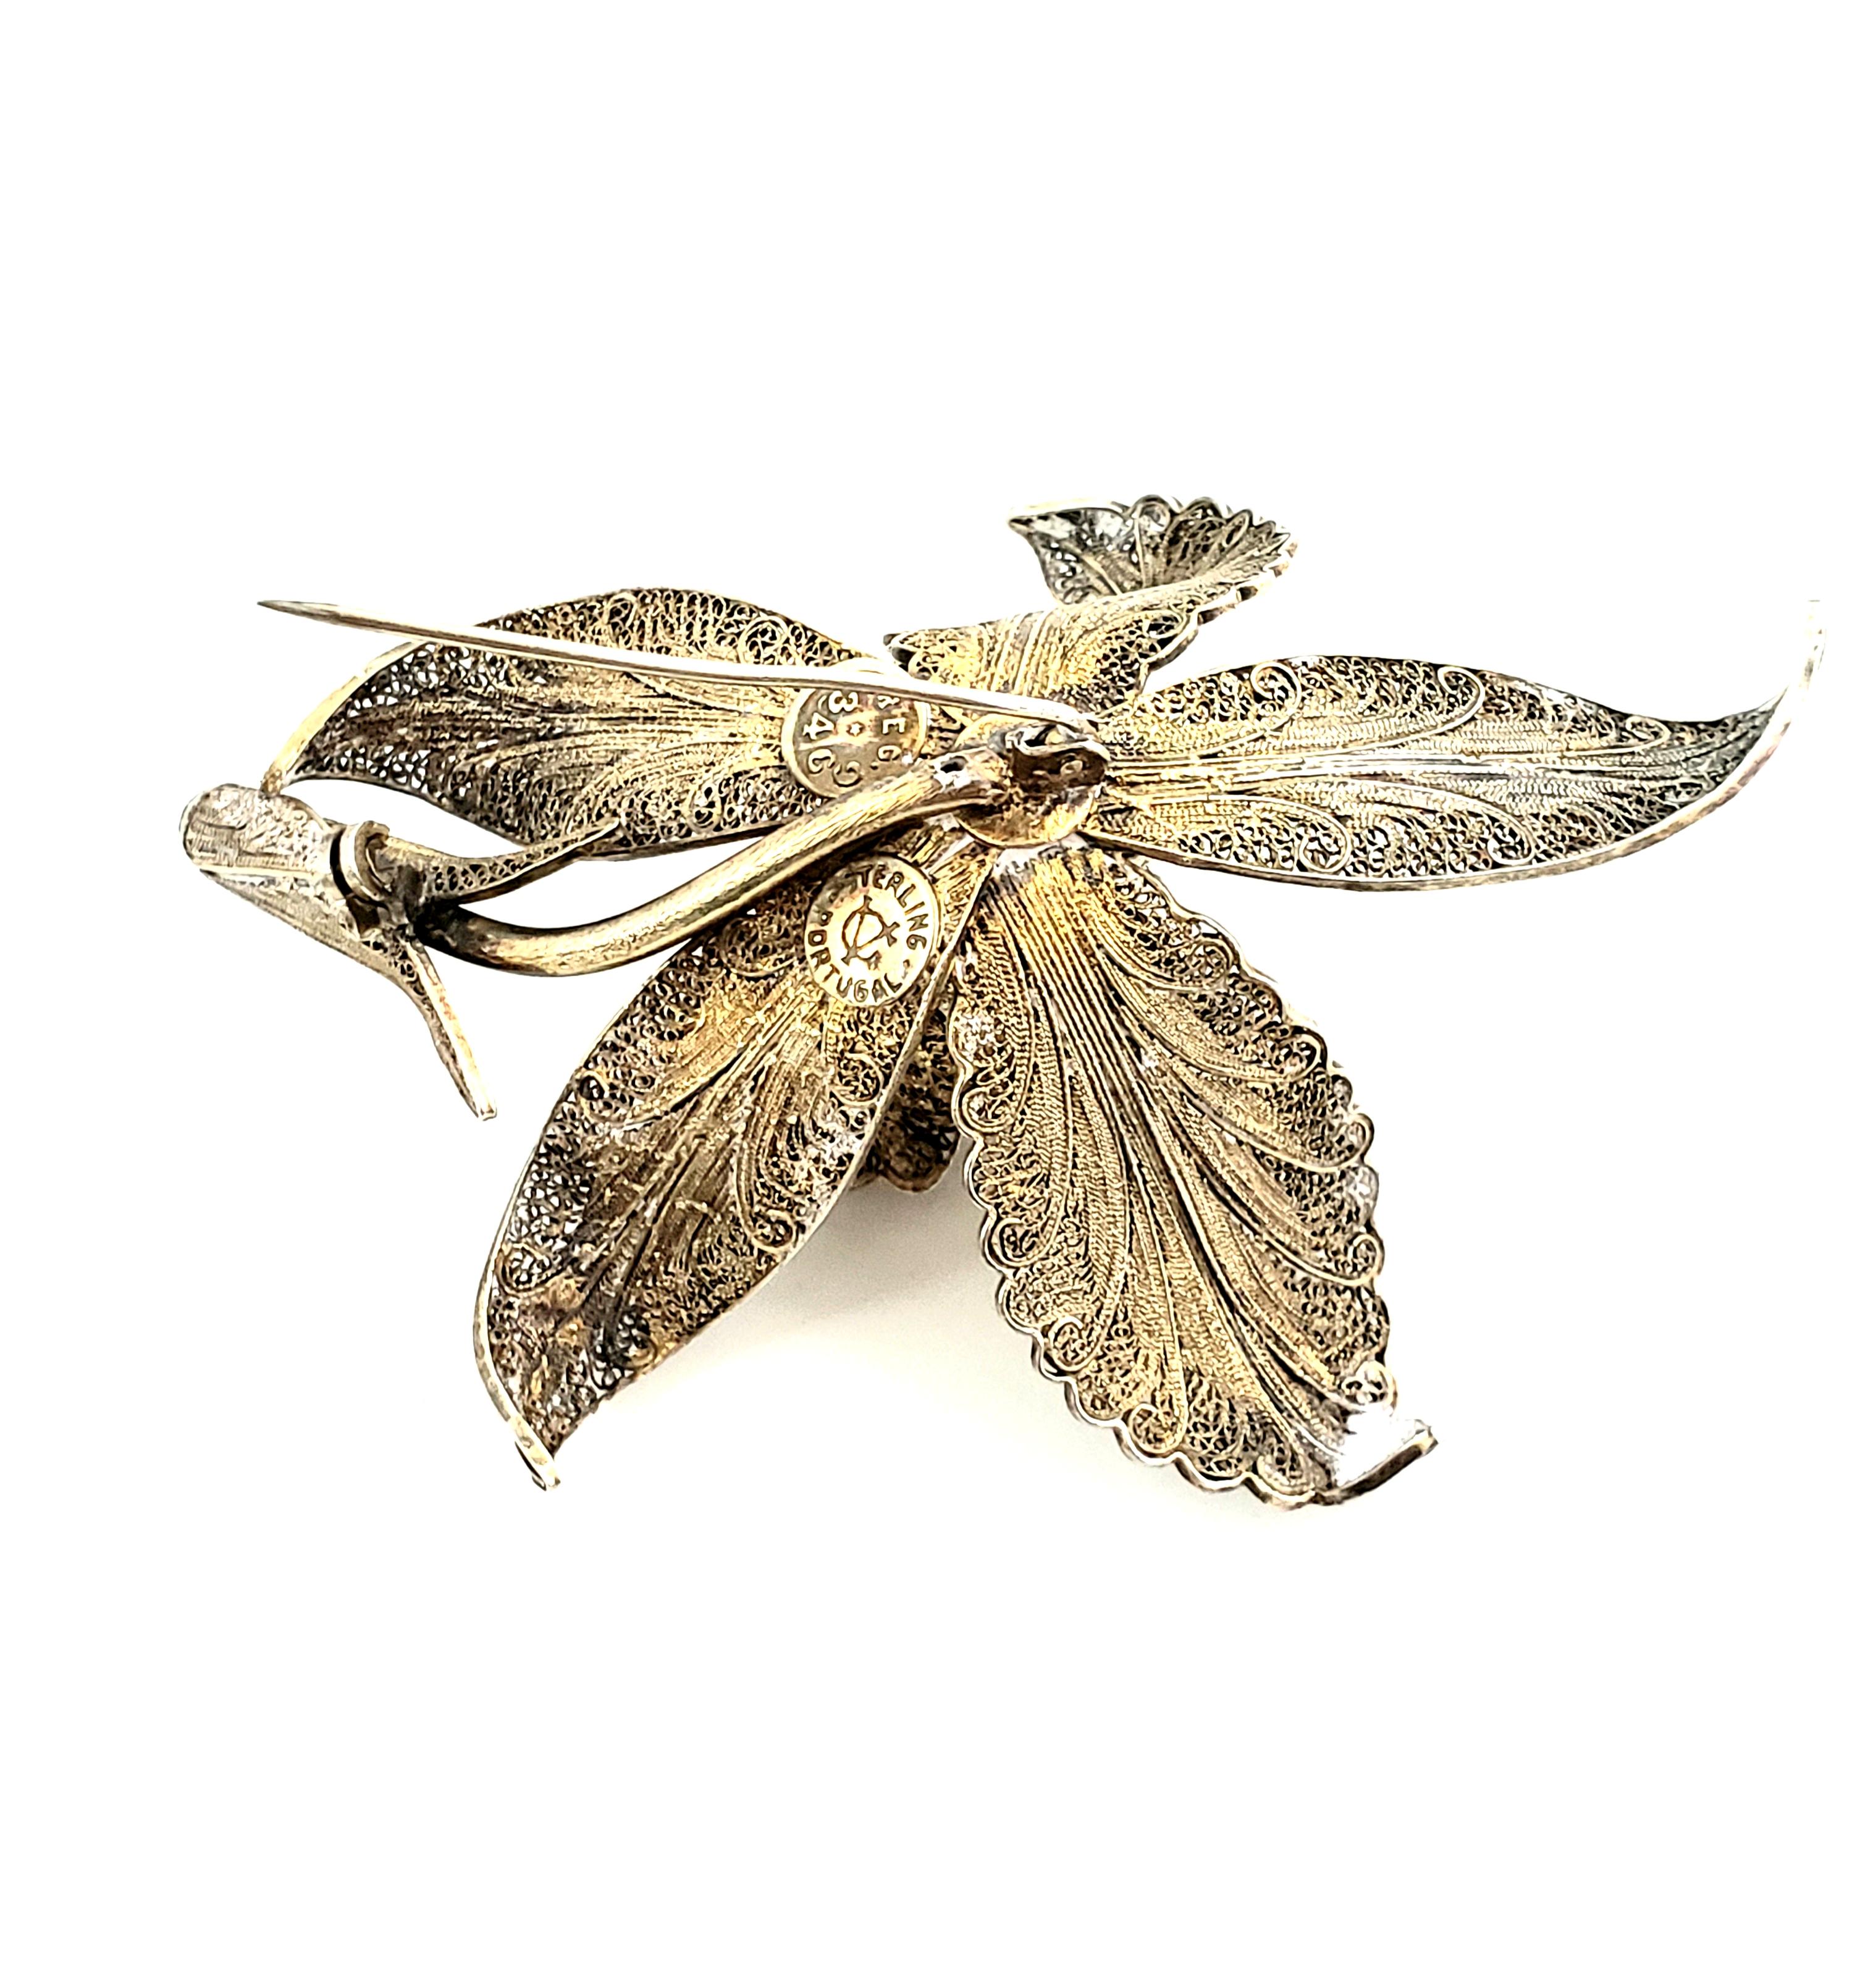 Sterling Sterling Portugal Vermeil Filigree Brooch, Reg 3469

This is a fabulous Portugal sterling vermeil flower brooch. Realistic gold sterling vermeil in light Airy filigree pattern.

Measurements:     Brooch measures 3 1/2 inches length, 2 1/2